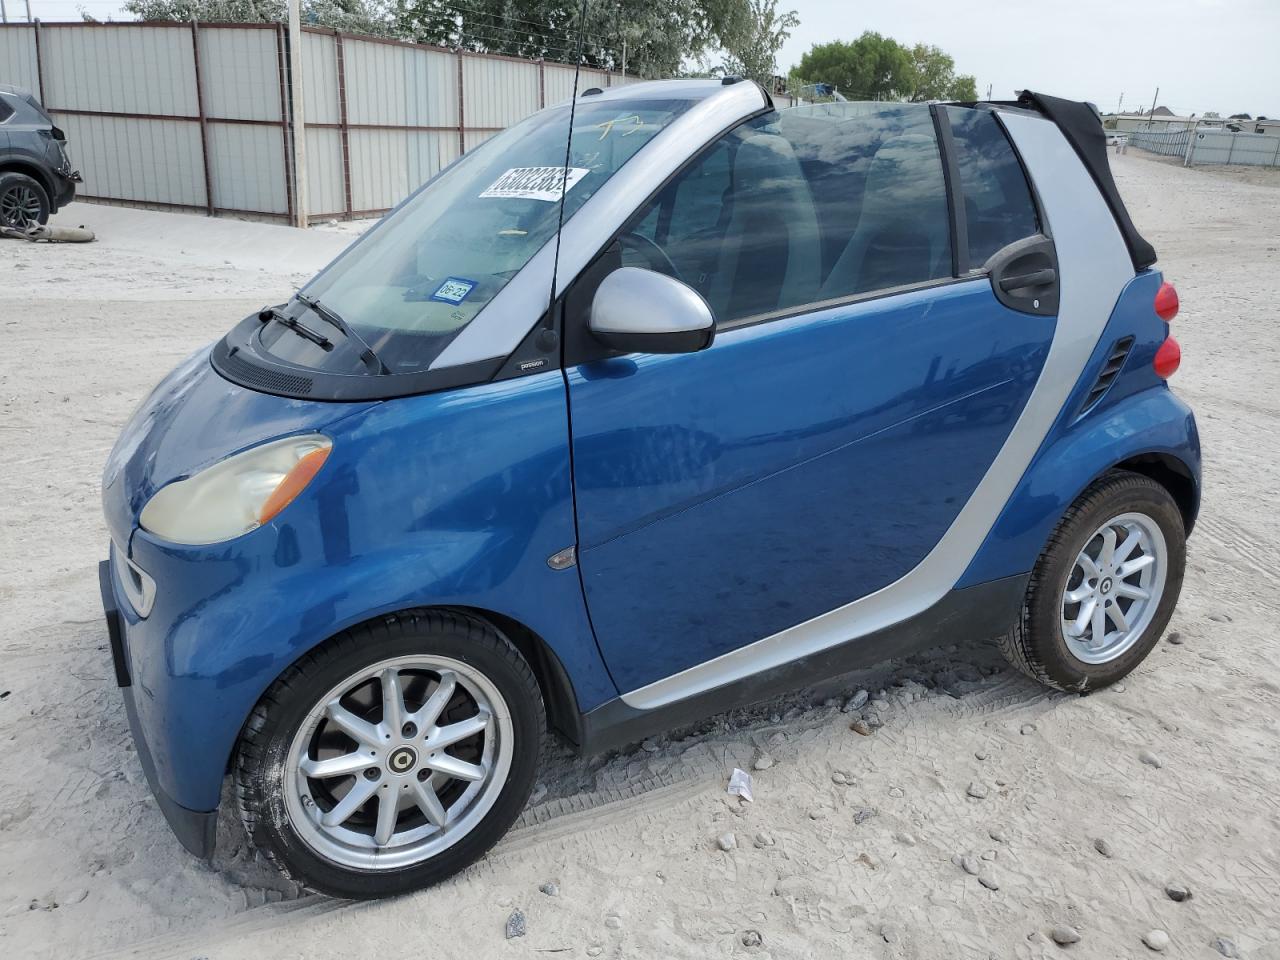 vin: WMEEK31X28K190771 WMEEK31X28K190771 2008 smart fortwo 1000 for Sale in 76052 3840, Tx - Ft. Worth, Haslet, USA